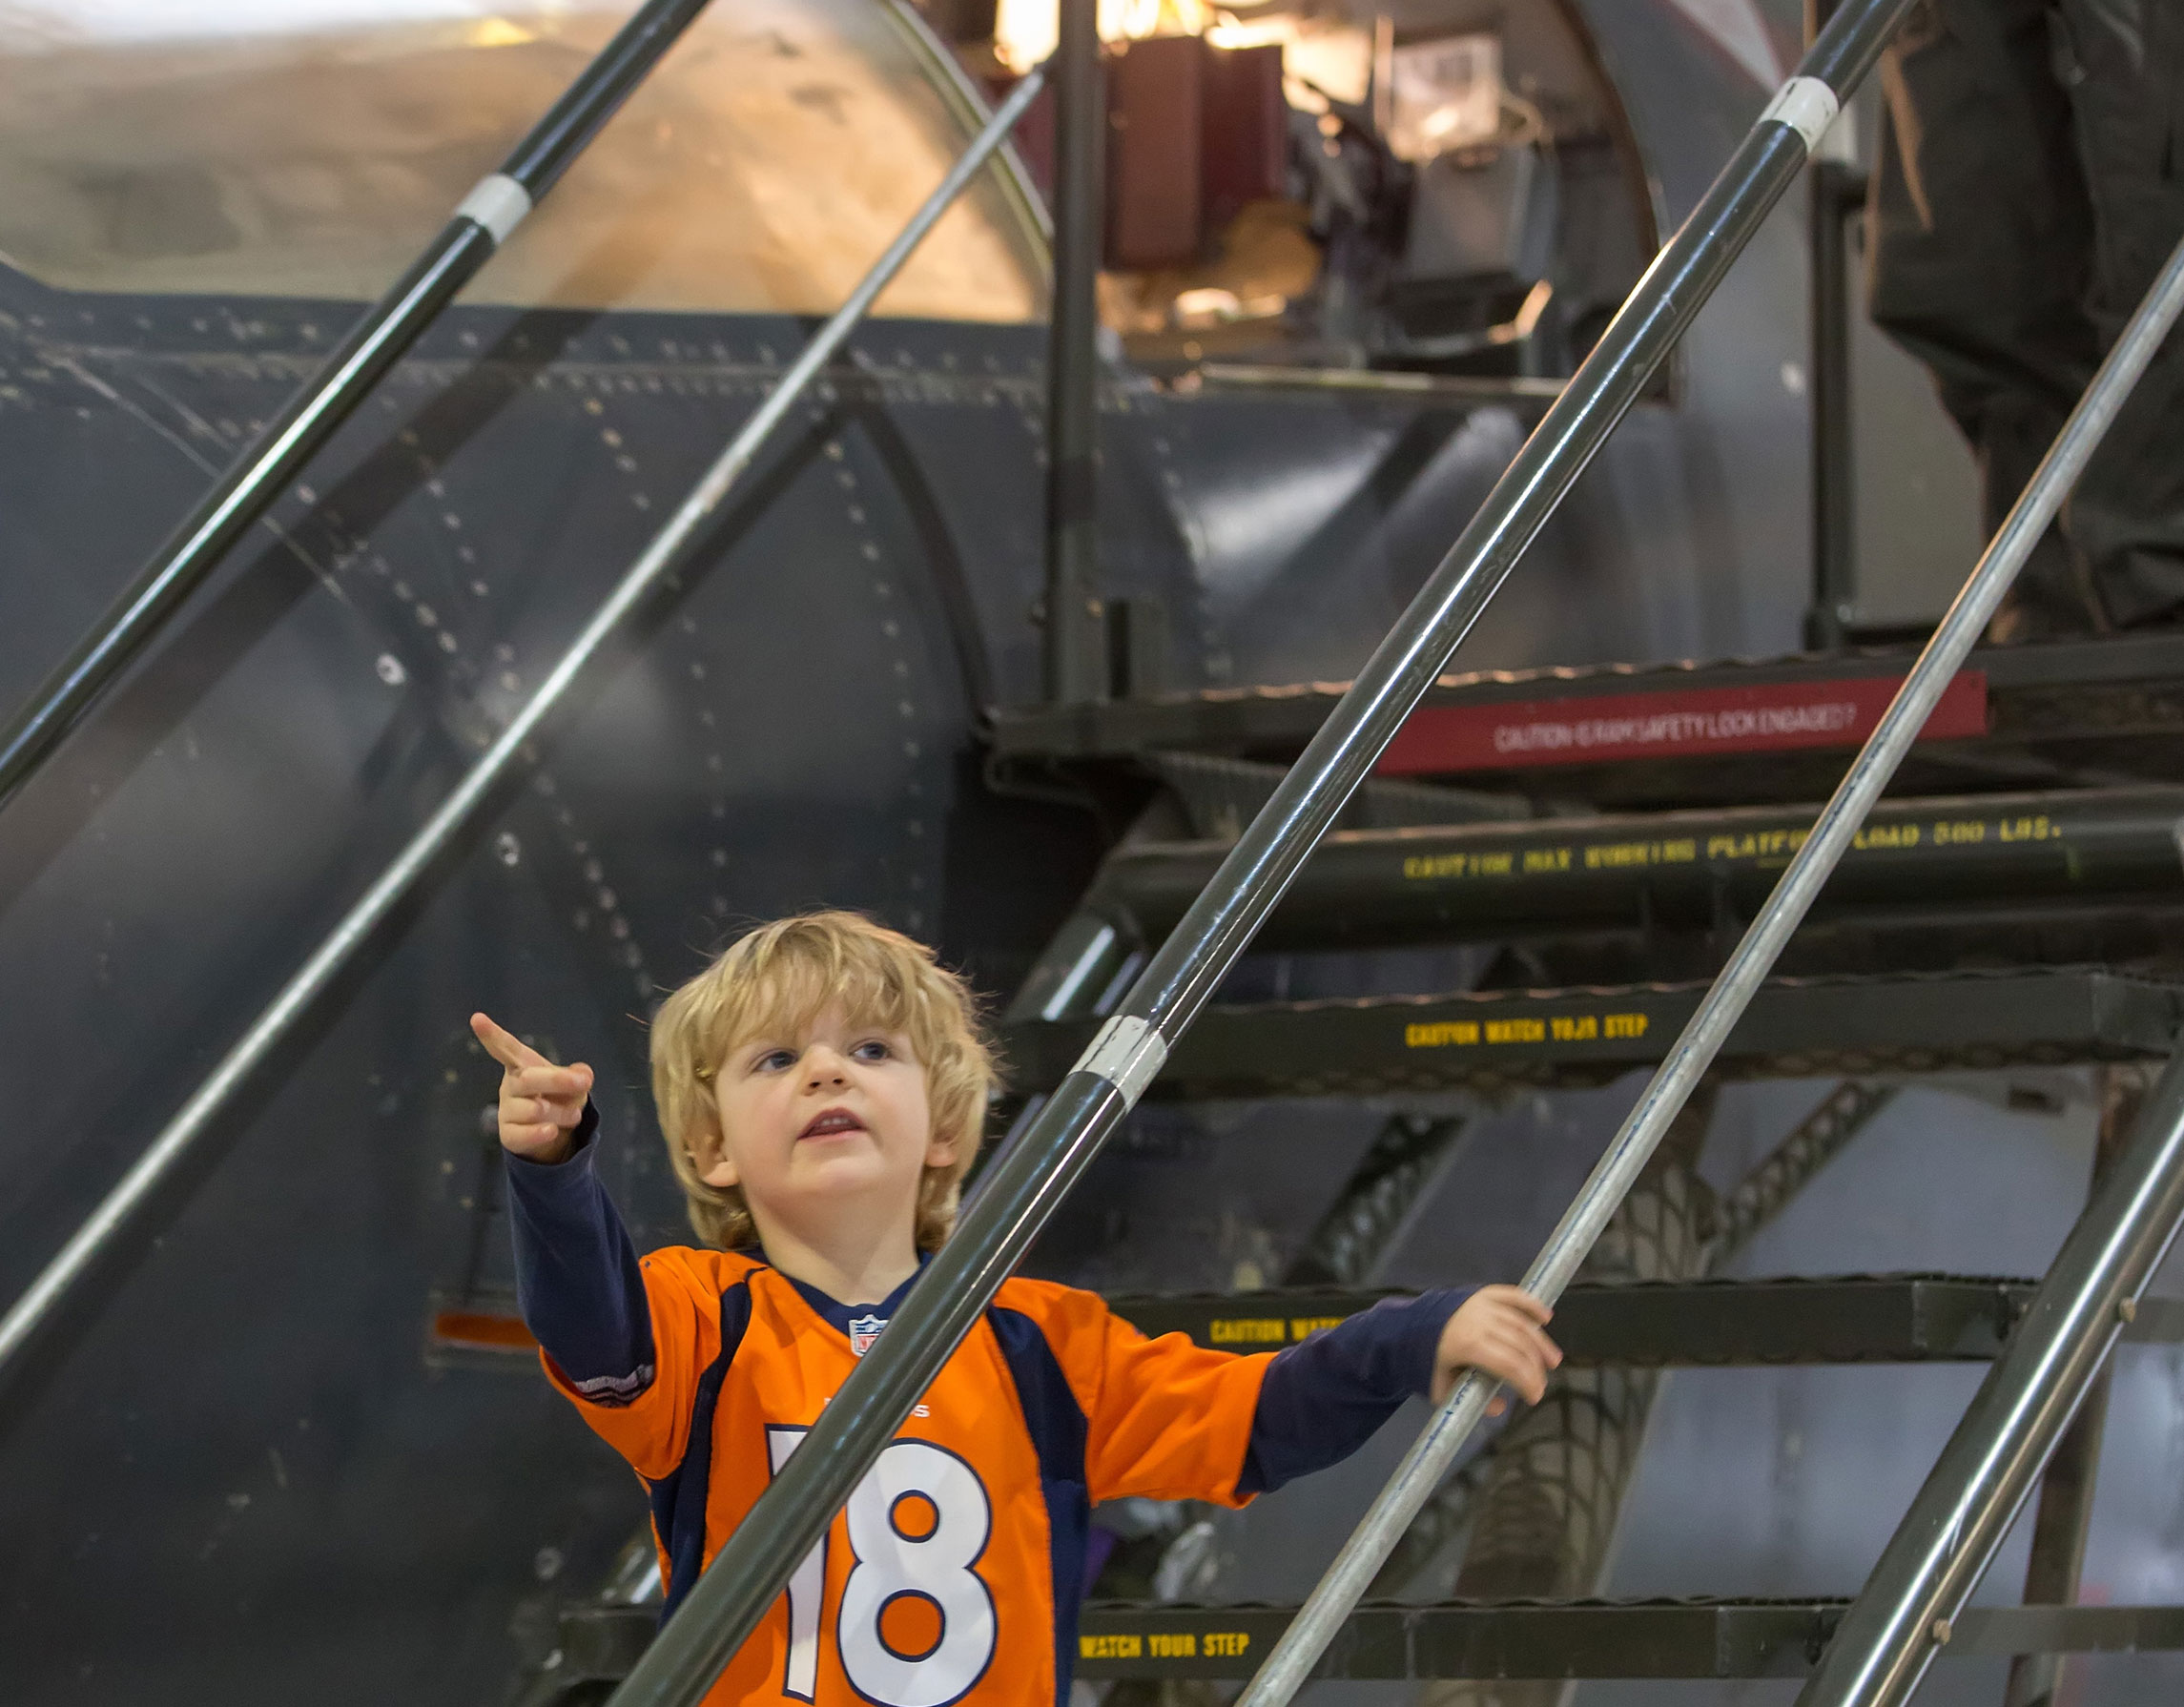 Young boy points up at airplane in the hangar